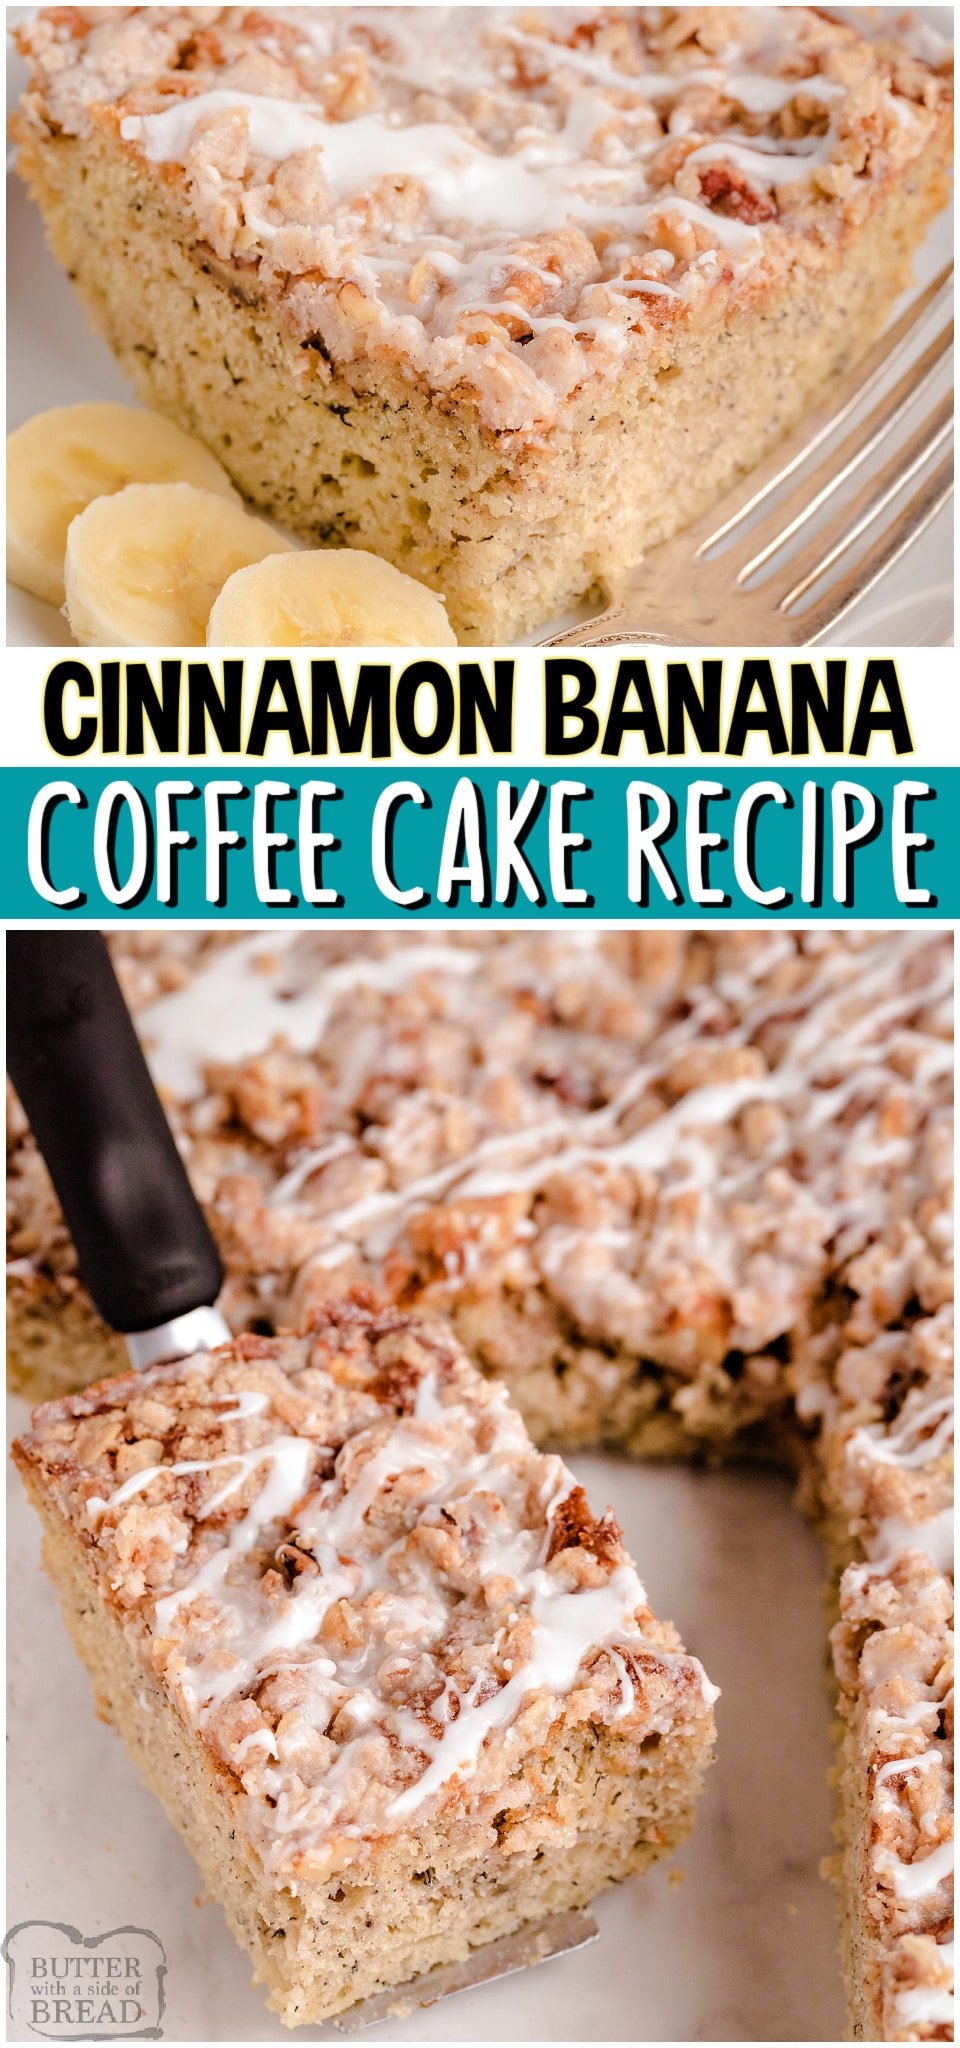 Banana Breakfast Cake is a delicious banana coffee cake with a tasty vanilla glaze. Everyone loves when we have this for breakfast! A soft and tender banana coffee cake with cinnamon oat crumb topping and icing makes for a great breakfast treat.